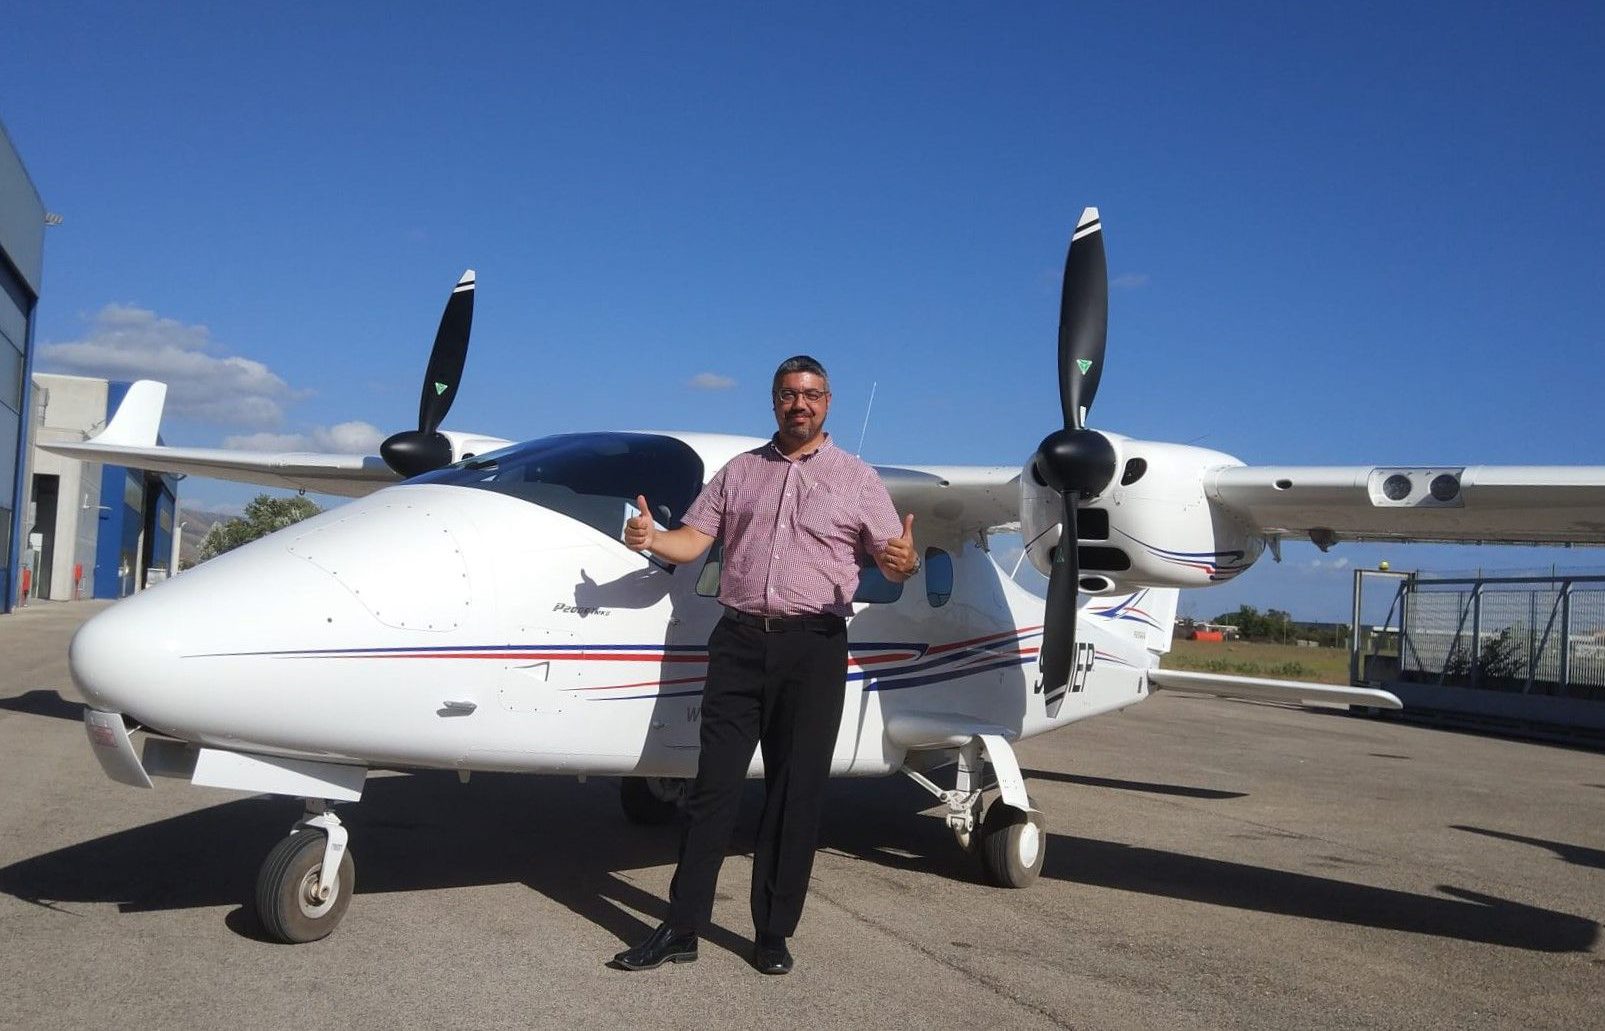 ’20 years of very hard work’: MD Patrick Fenech reflects on Malta School of Flying’s 20th anniversary